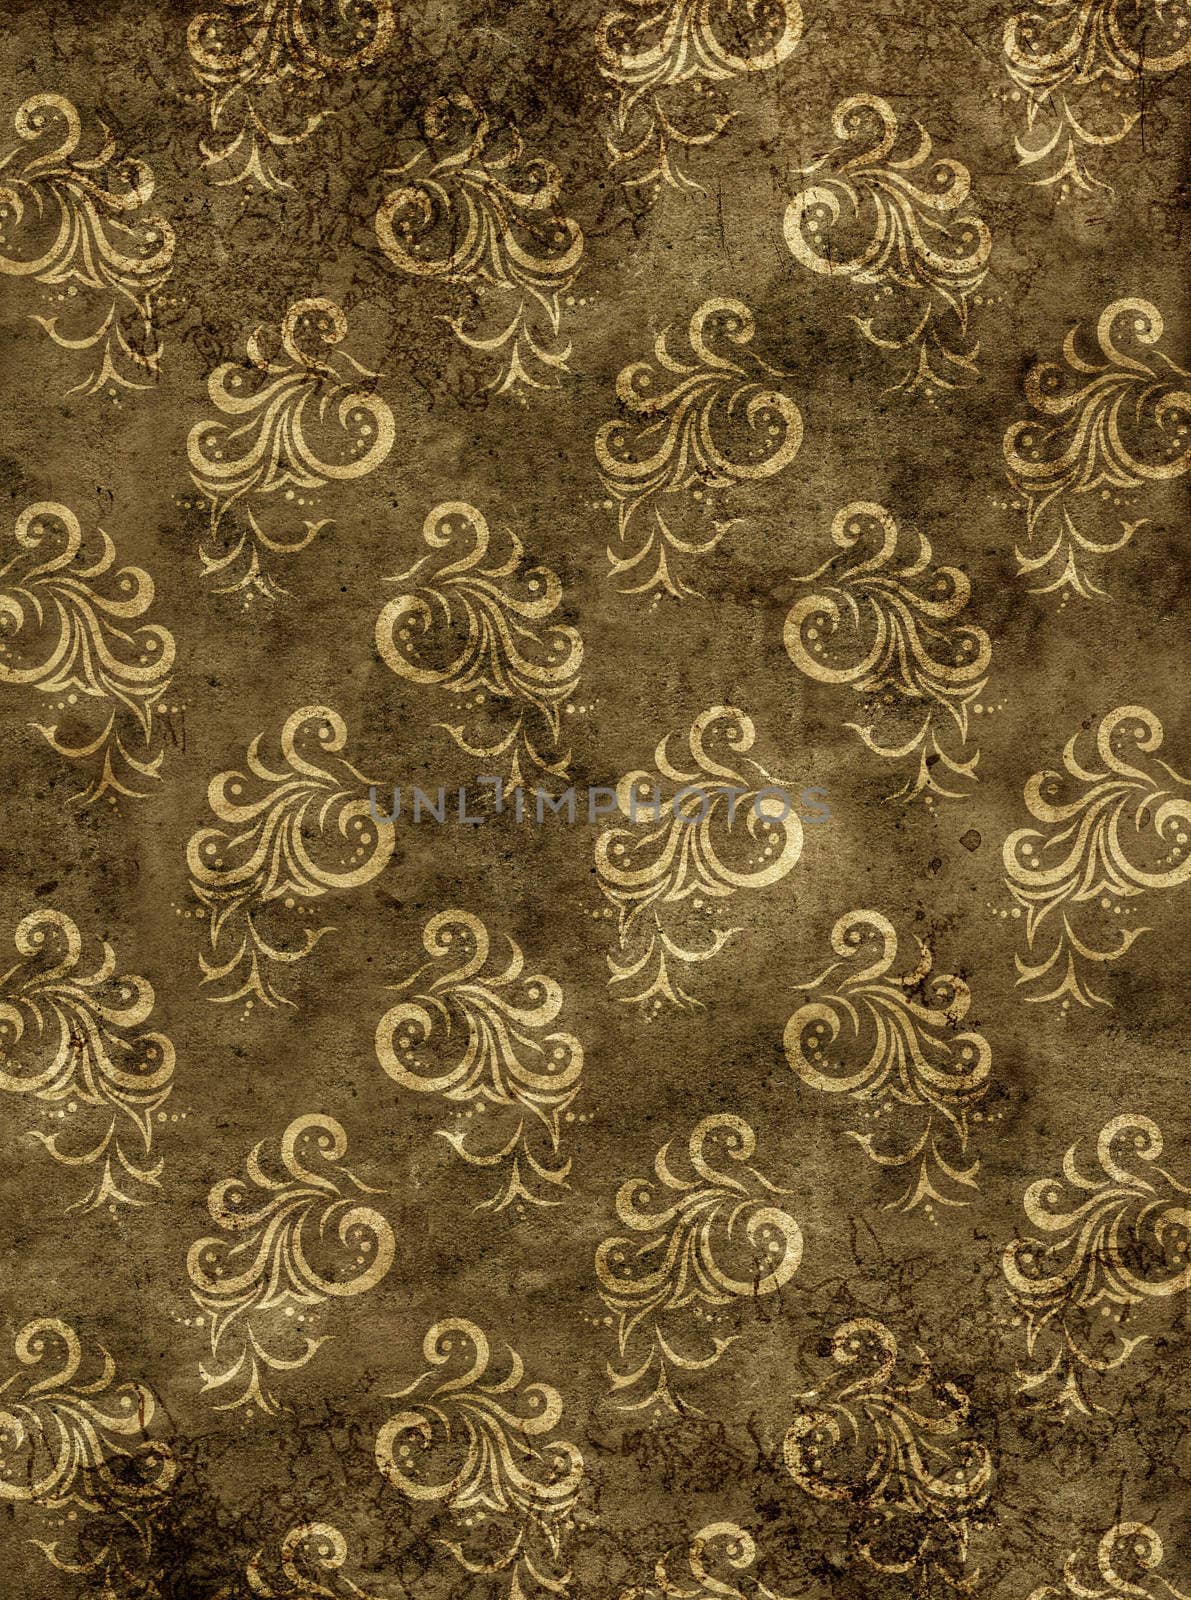 Paper texture with floral decor by frenta